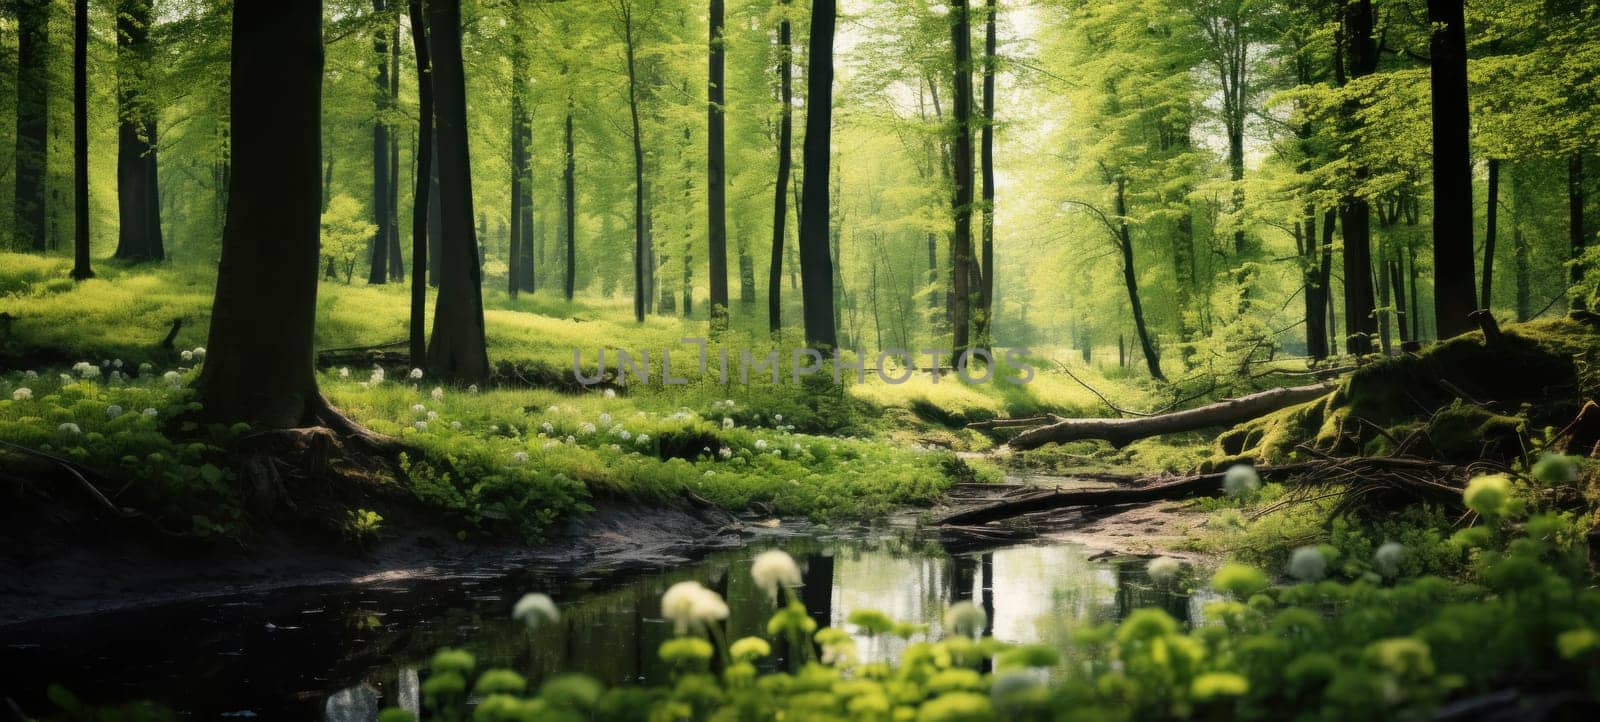 A serene forest scene with sunlight filtering through lush greenery beside a gentle stream, invoking tranquility.